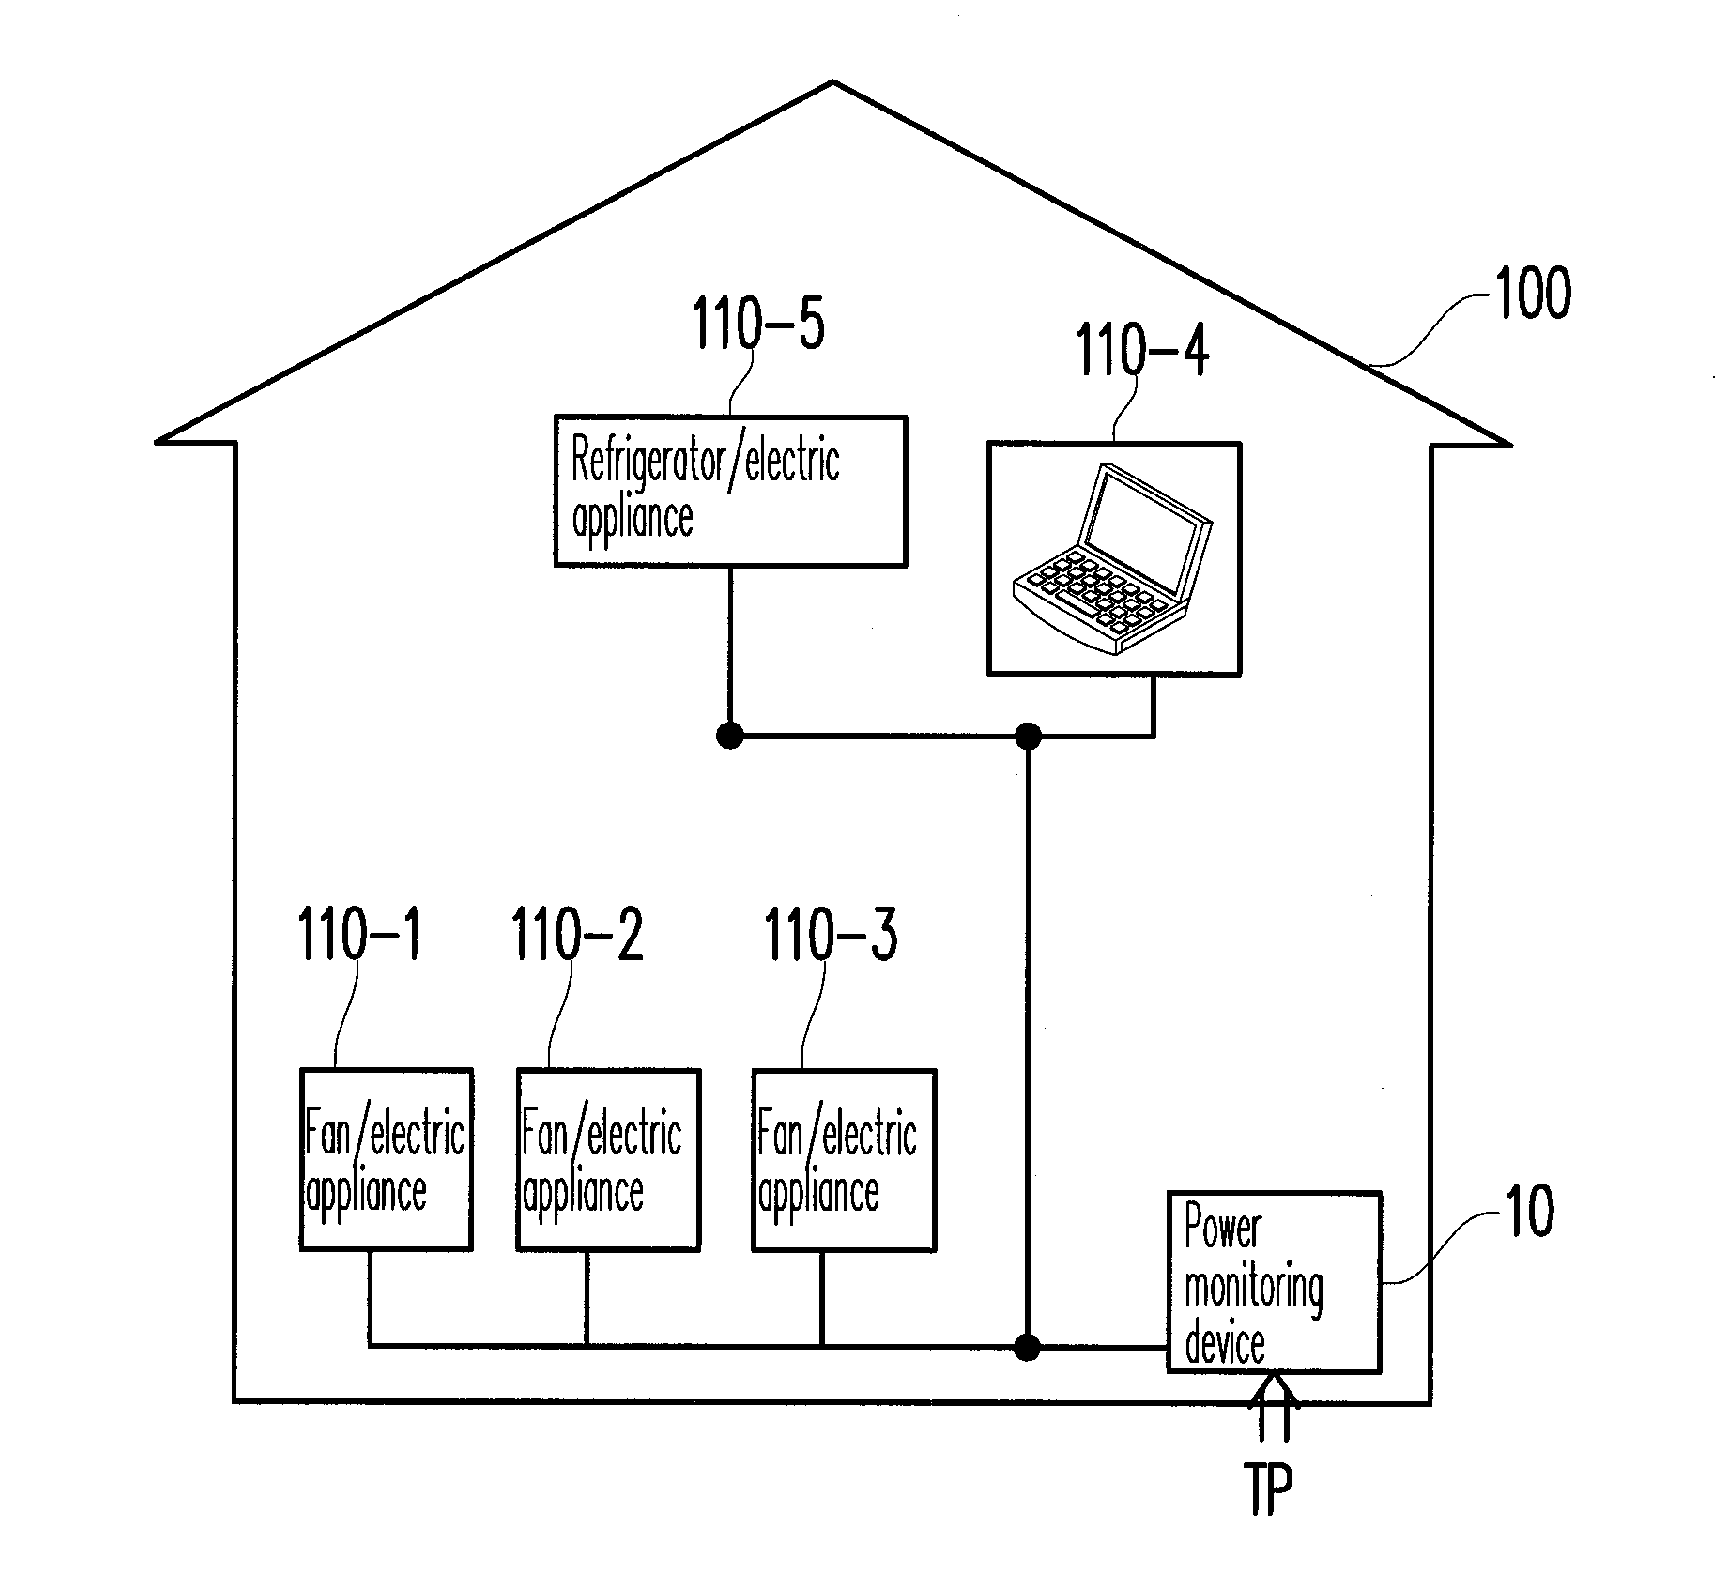 Power monitoring device for identifying state of electric appliance and power monitoring method thereof